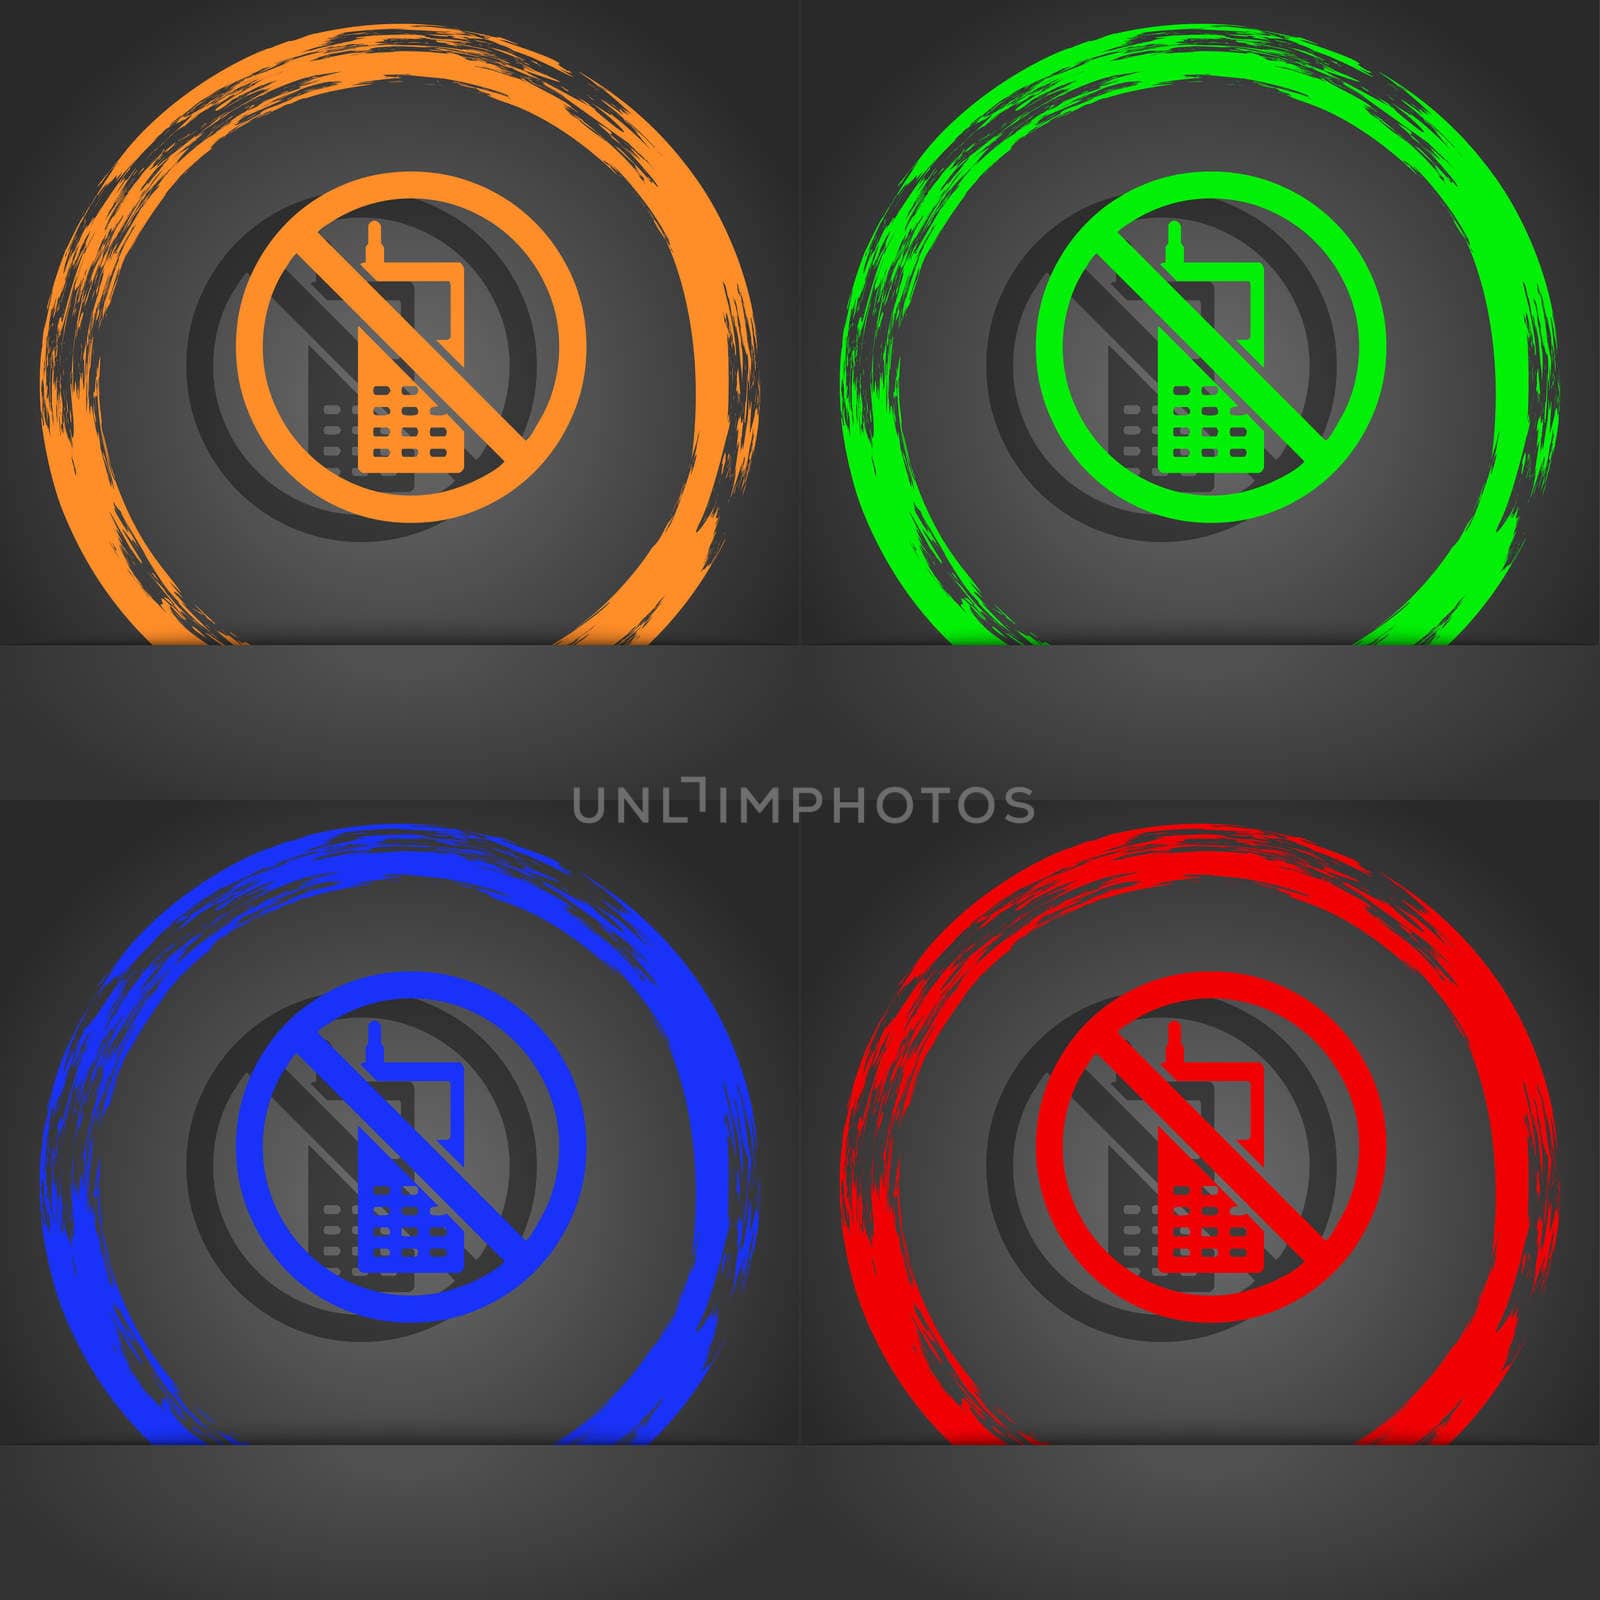 mobile phone is prohibited icon symbol. Fashionable modern style. In the orange, green, blue, green design. illustration